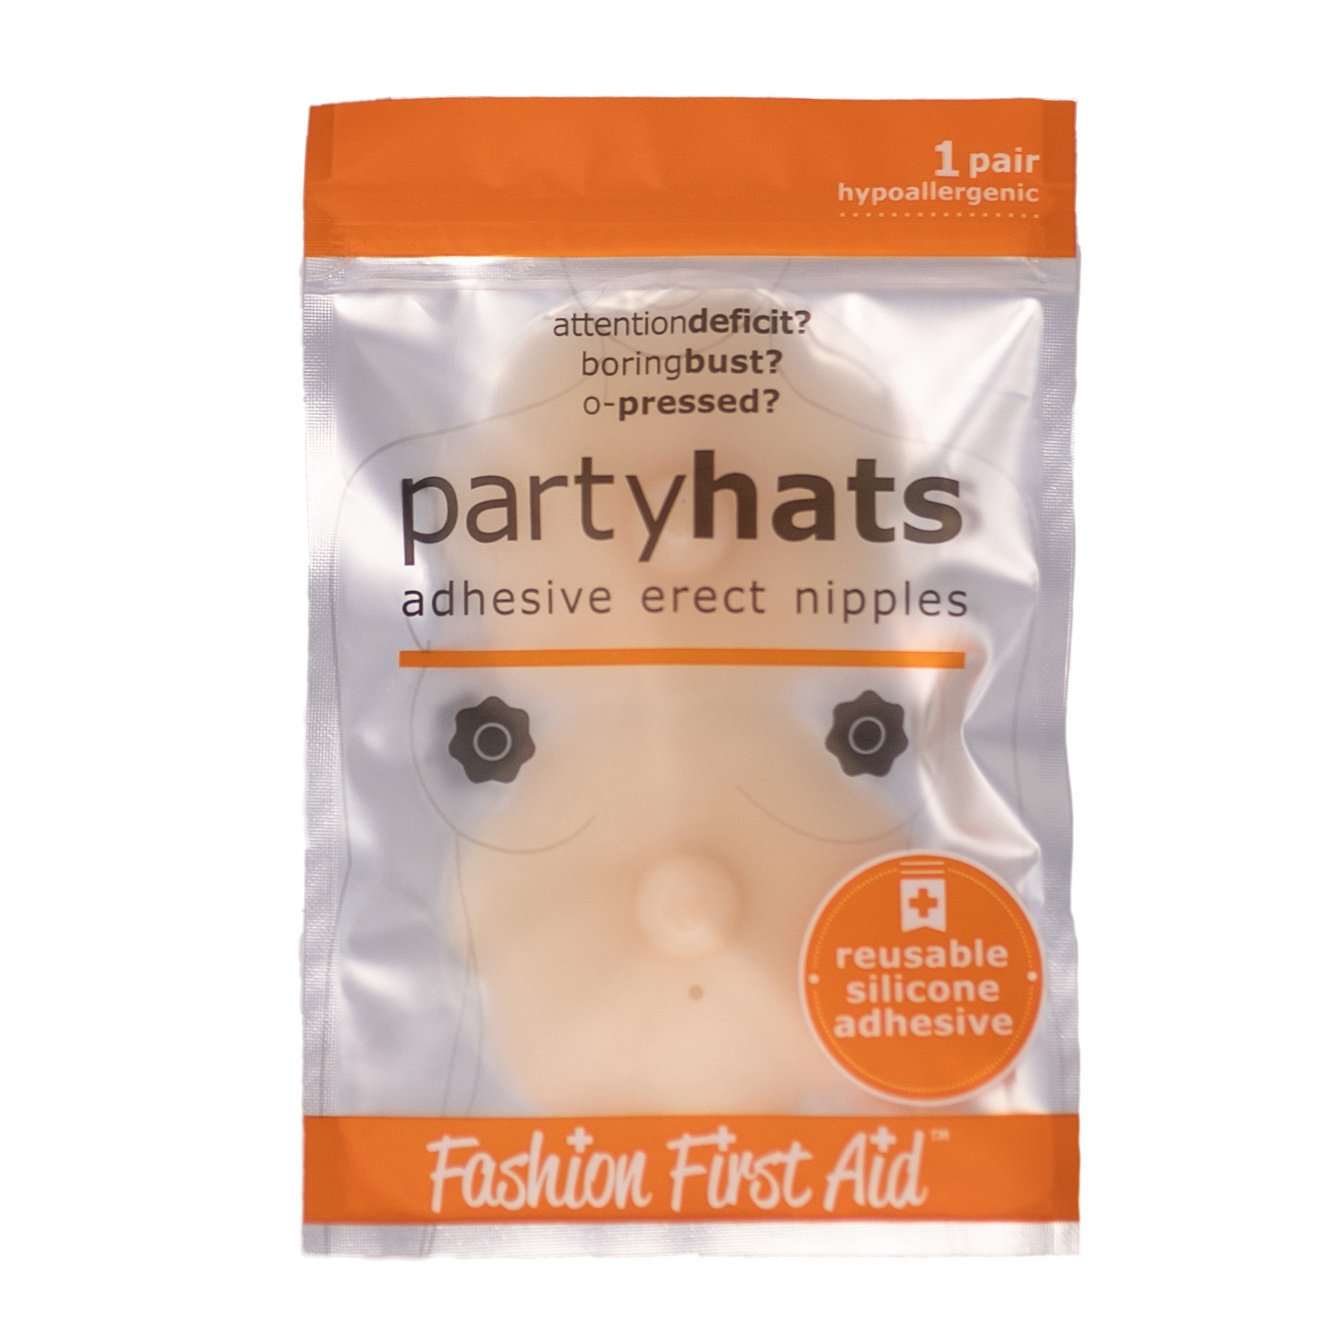 Party Hats: adhesive erect areolae